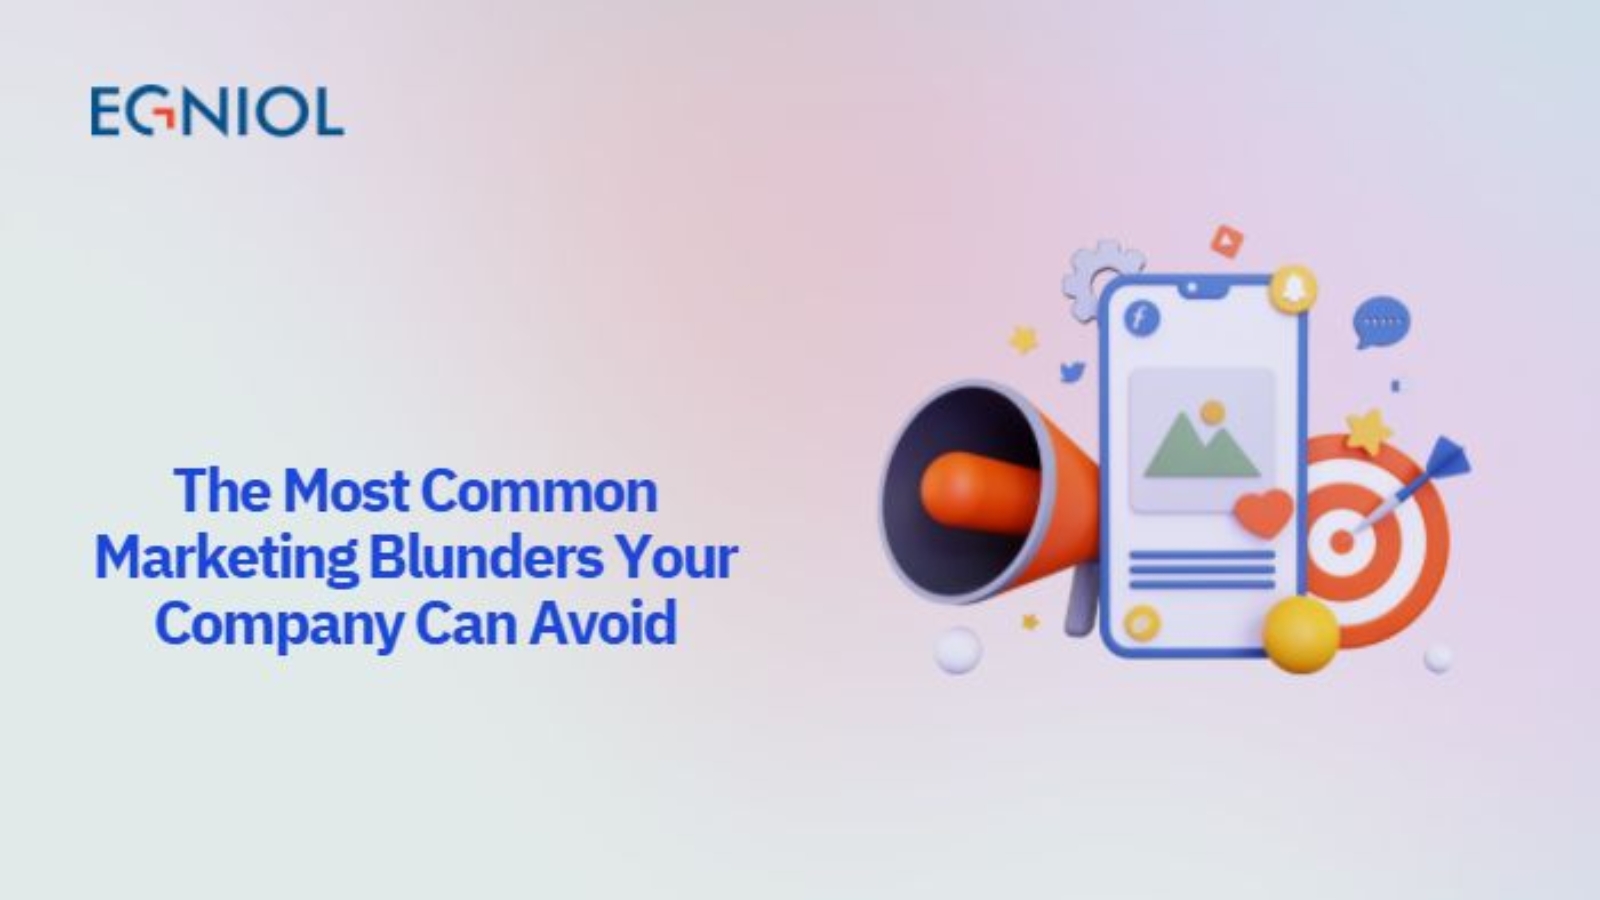 Marketing Blunders Your Company Can Avoid - By Egniol